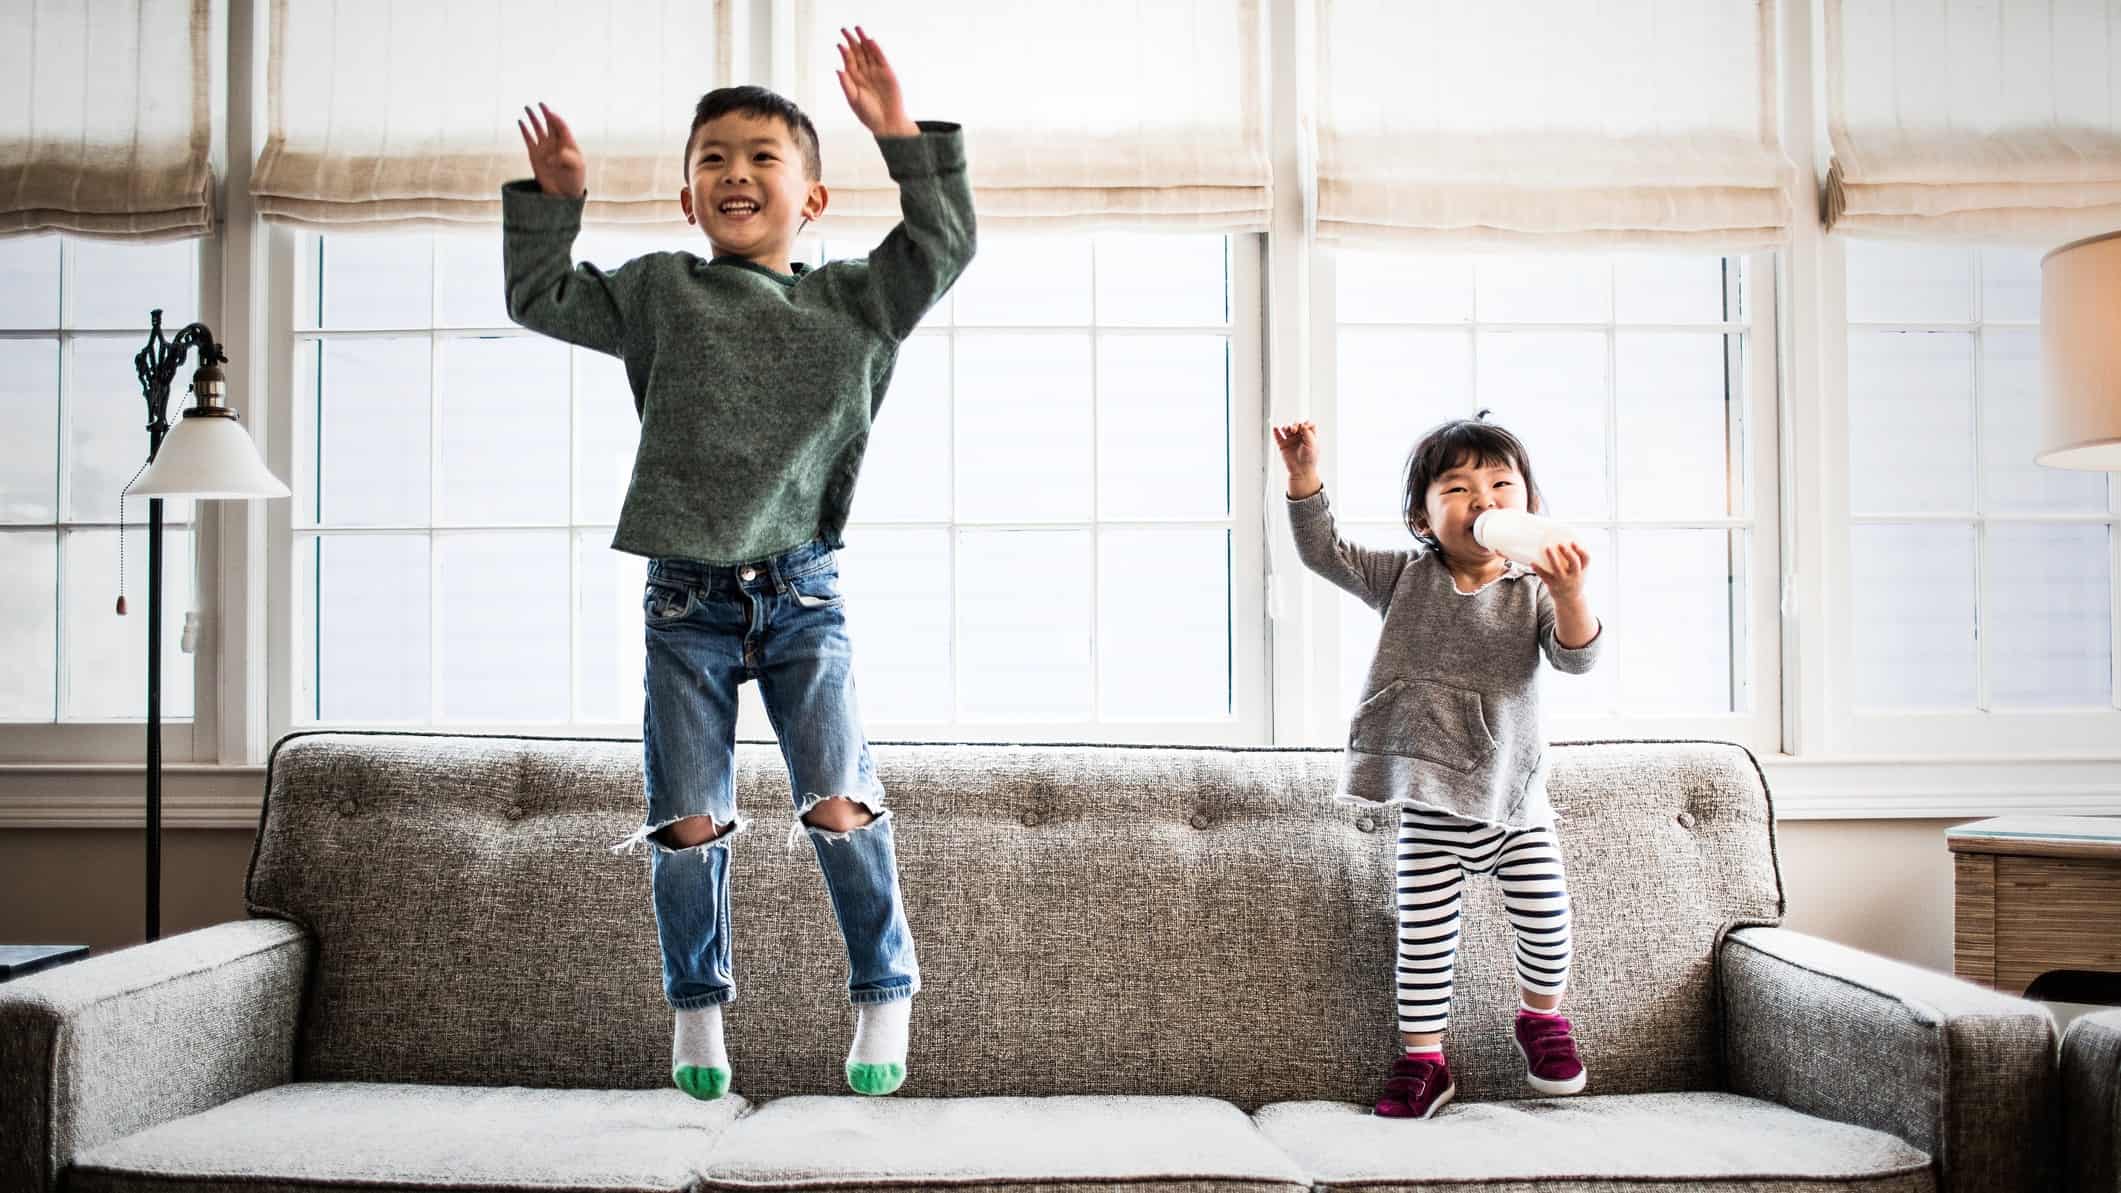 A young boy and young girl jump on the sofa with their hands in the air.